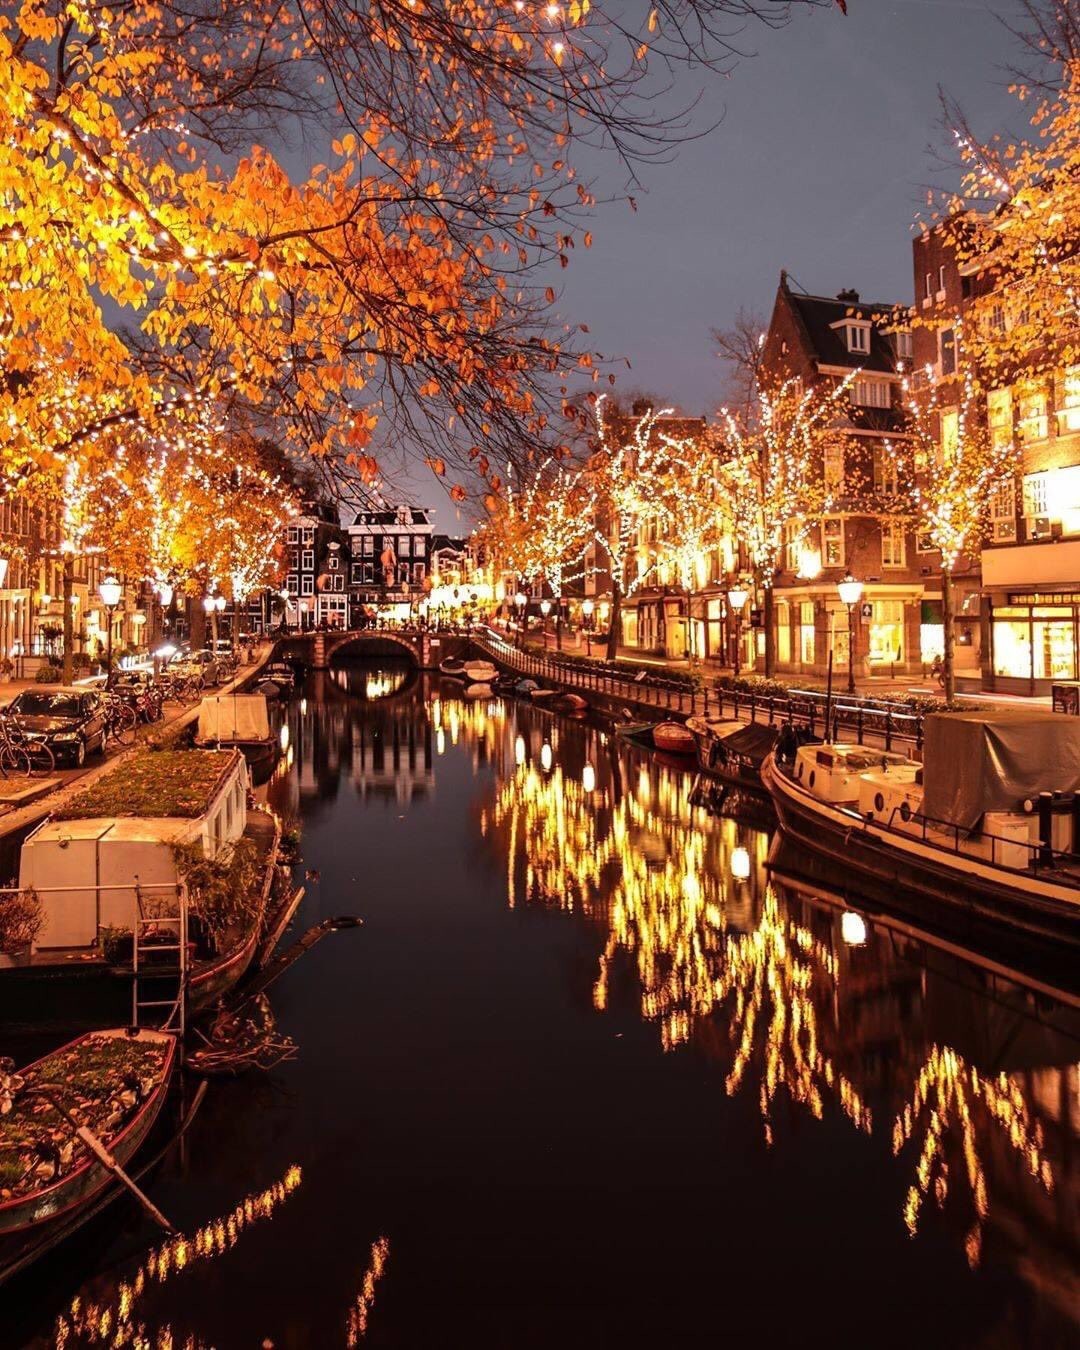 I will continue posting random pictures if they "speak to me". This is Amsterdam.